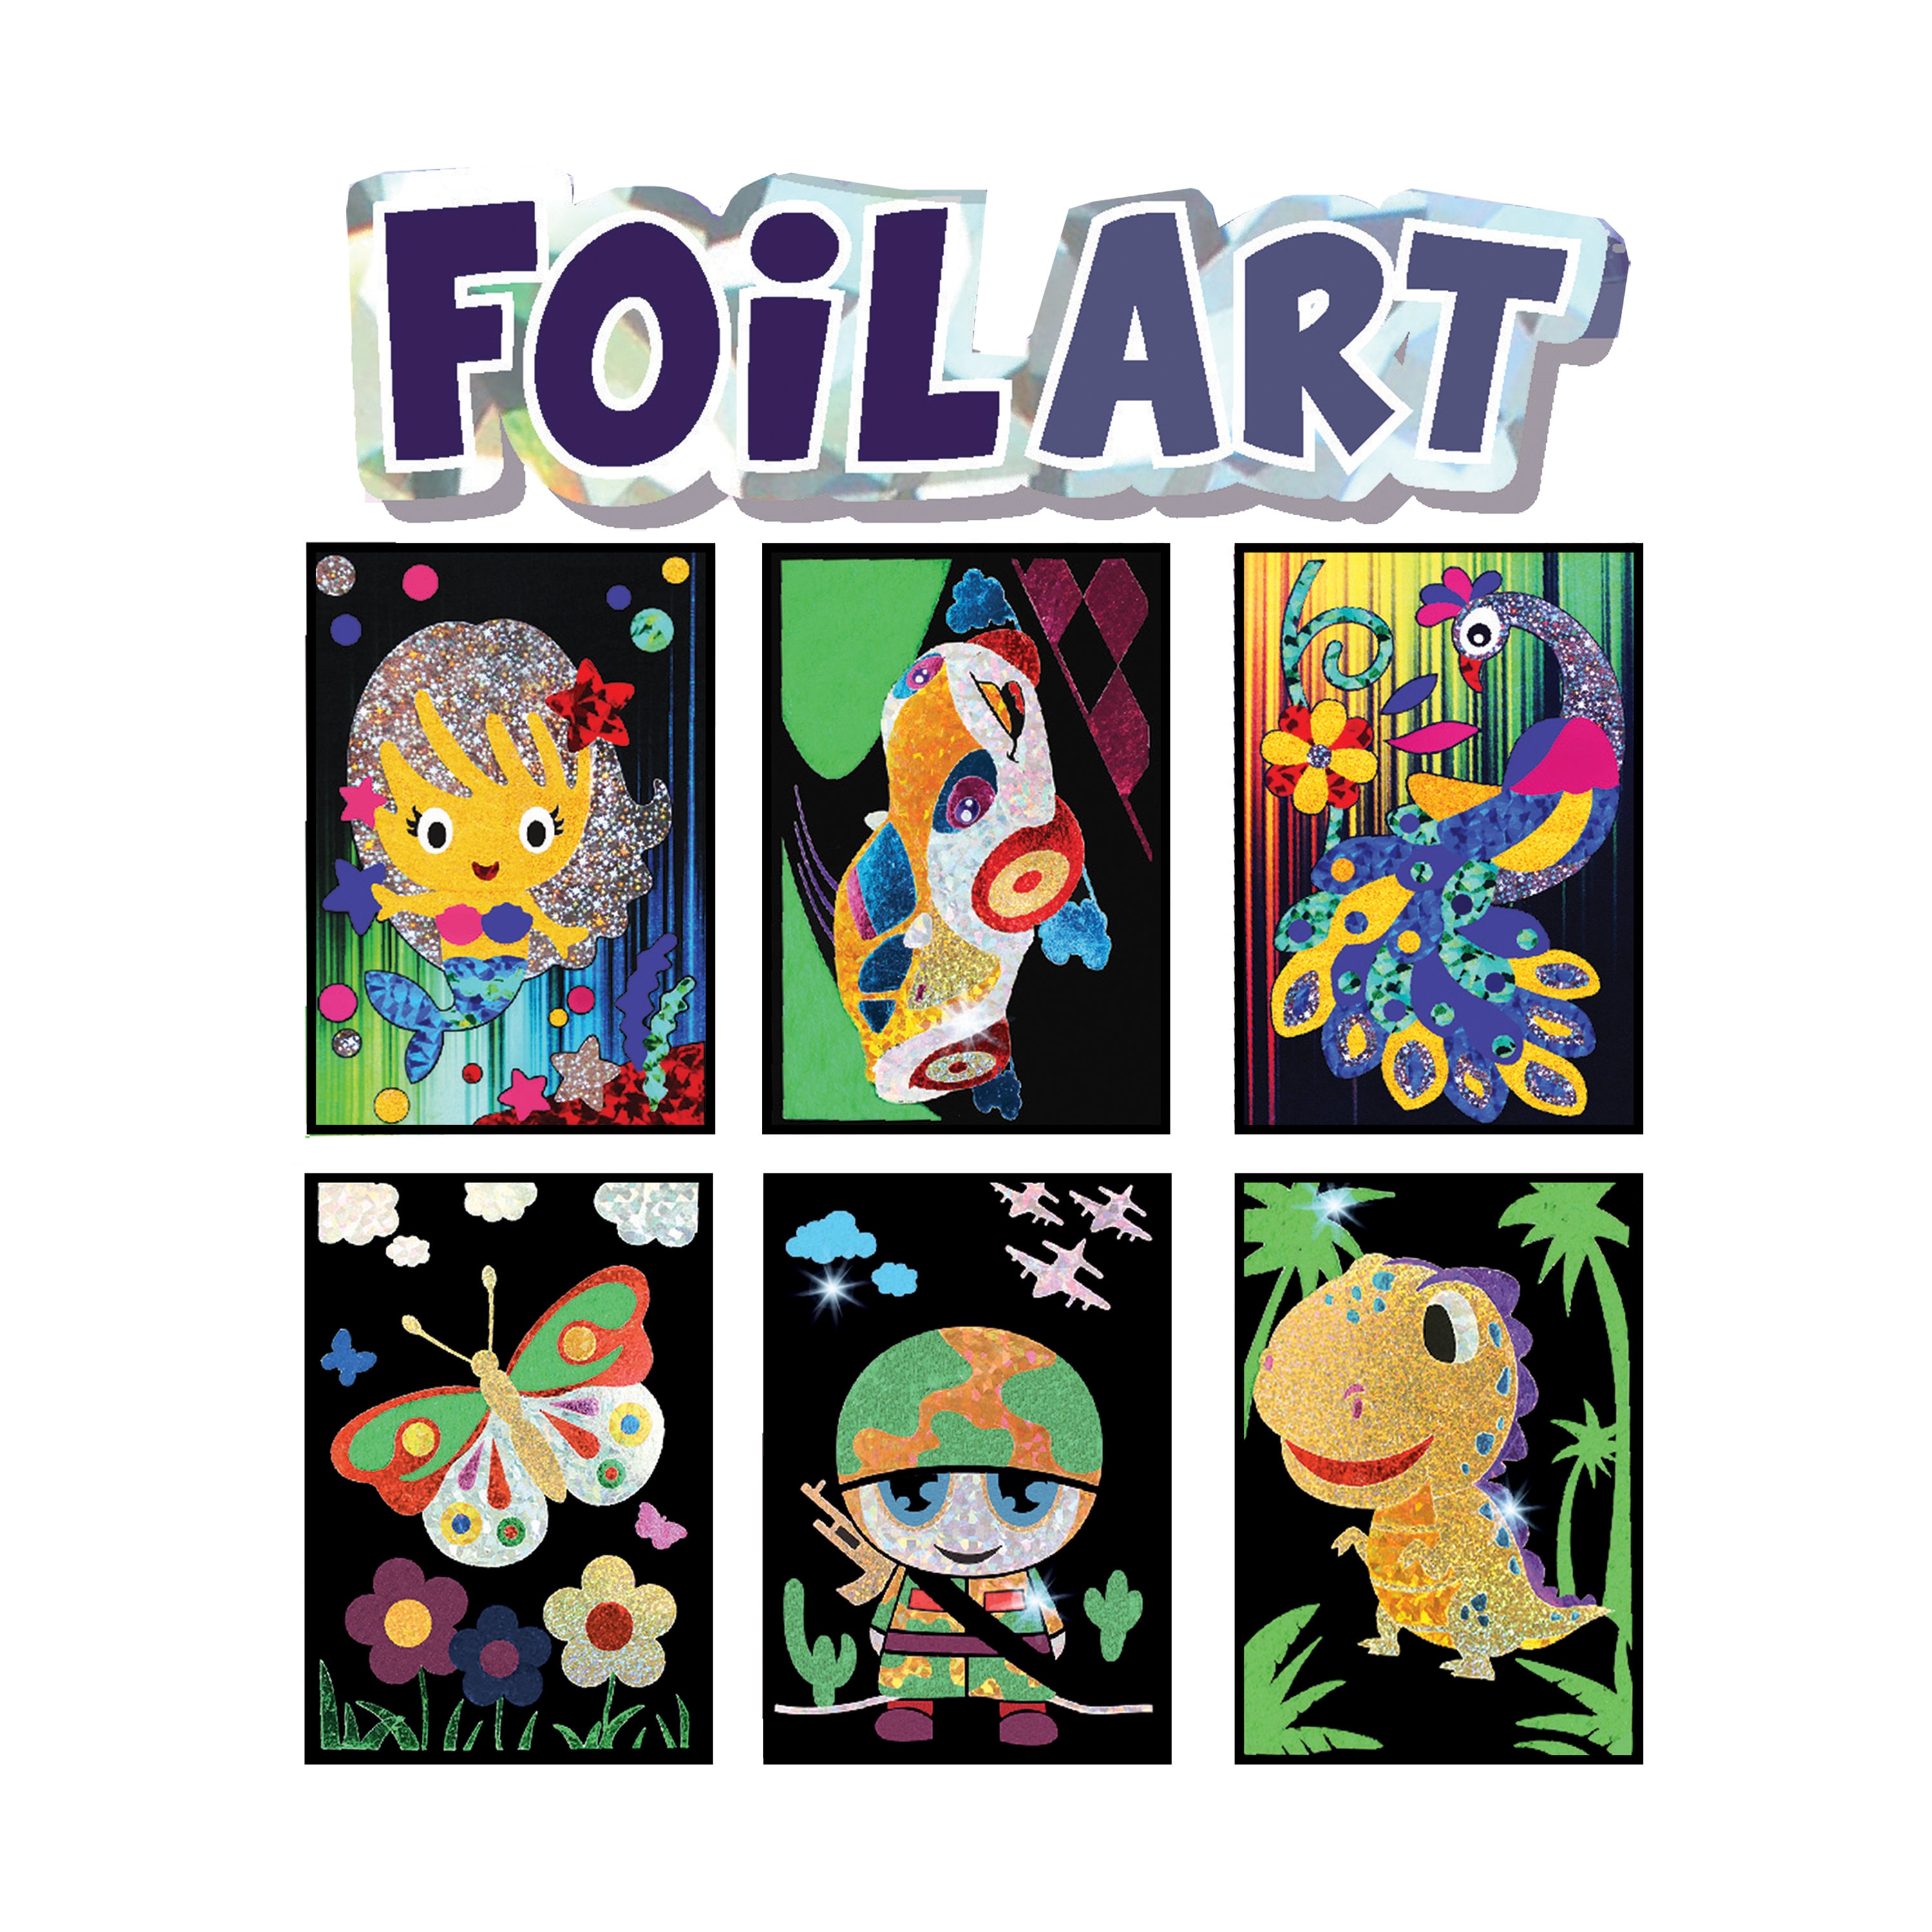 Foil Art Craft Kit 6 Pack Sticker Picture Peel and Paste Sparkly